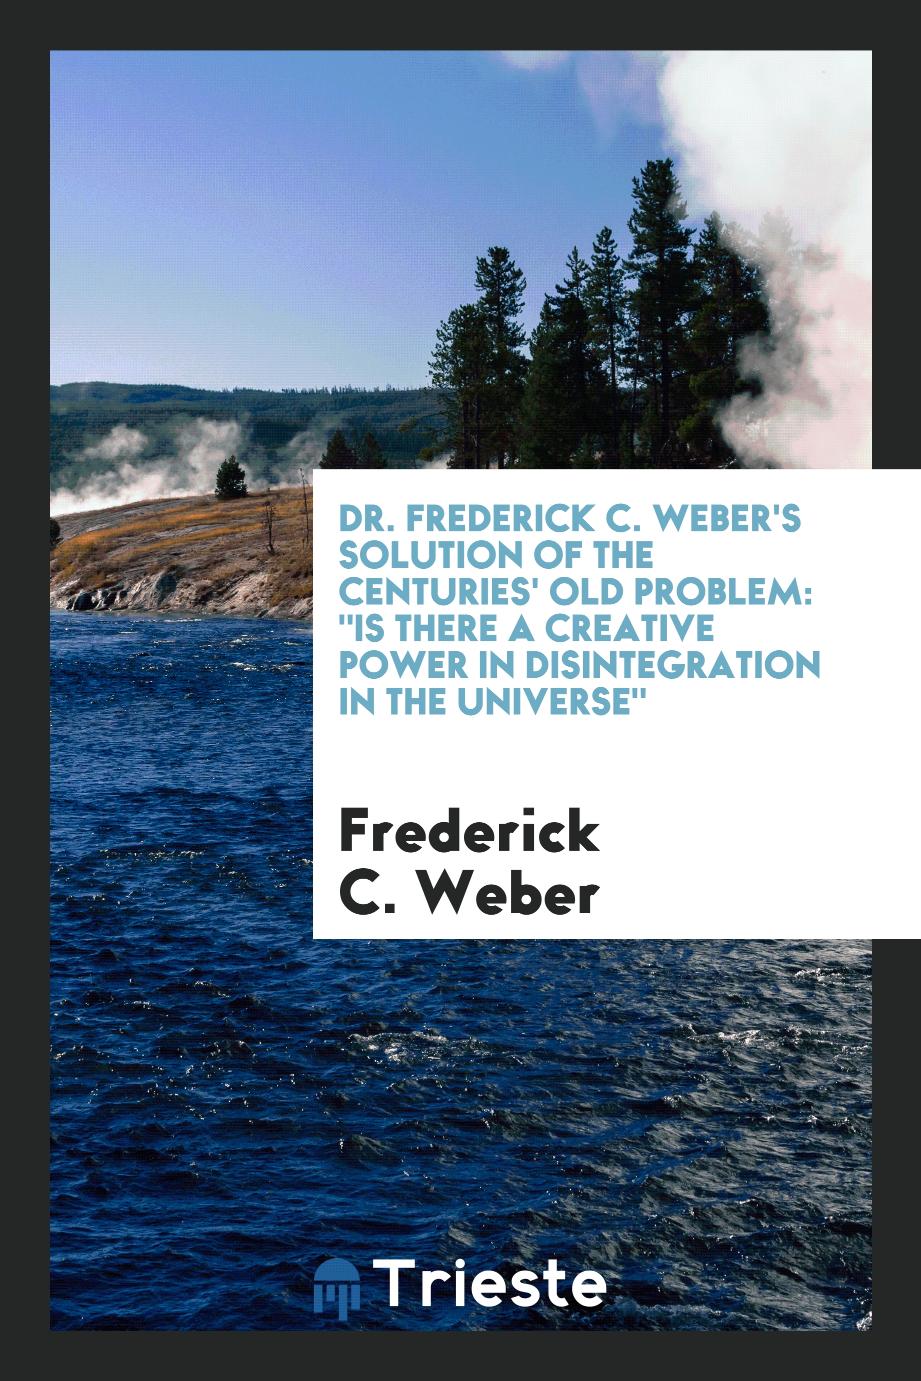 Dr. Frederick C. Weber's Solution of the Centuries' Old Problem: "Is There a Creative Power in Disintegration in the Universe"